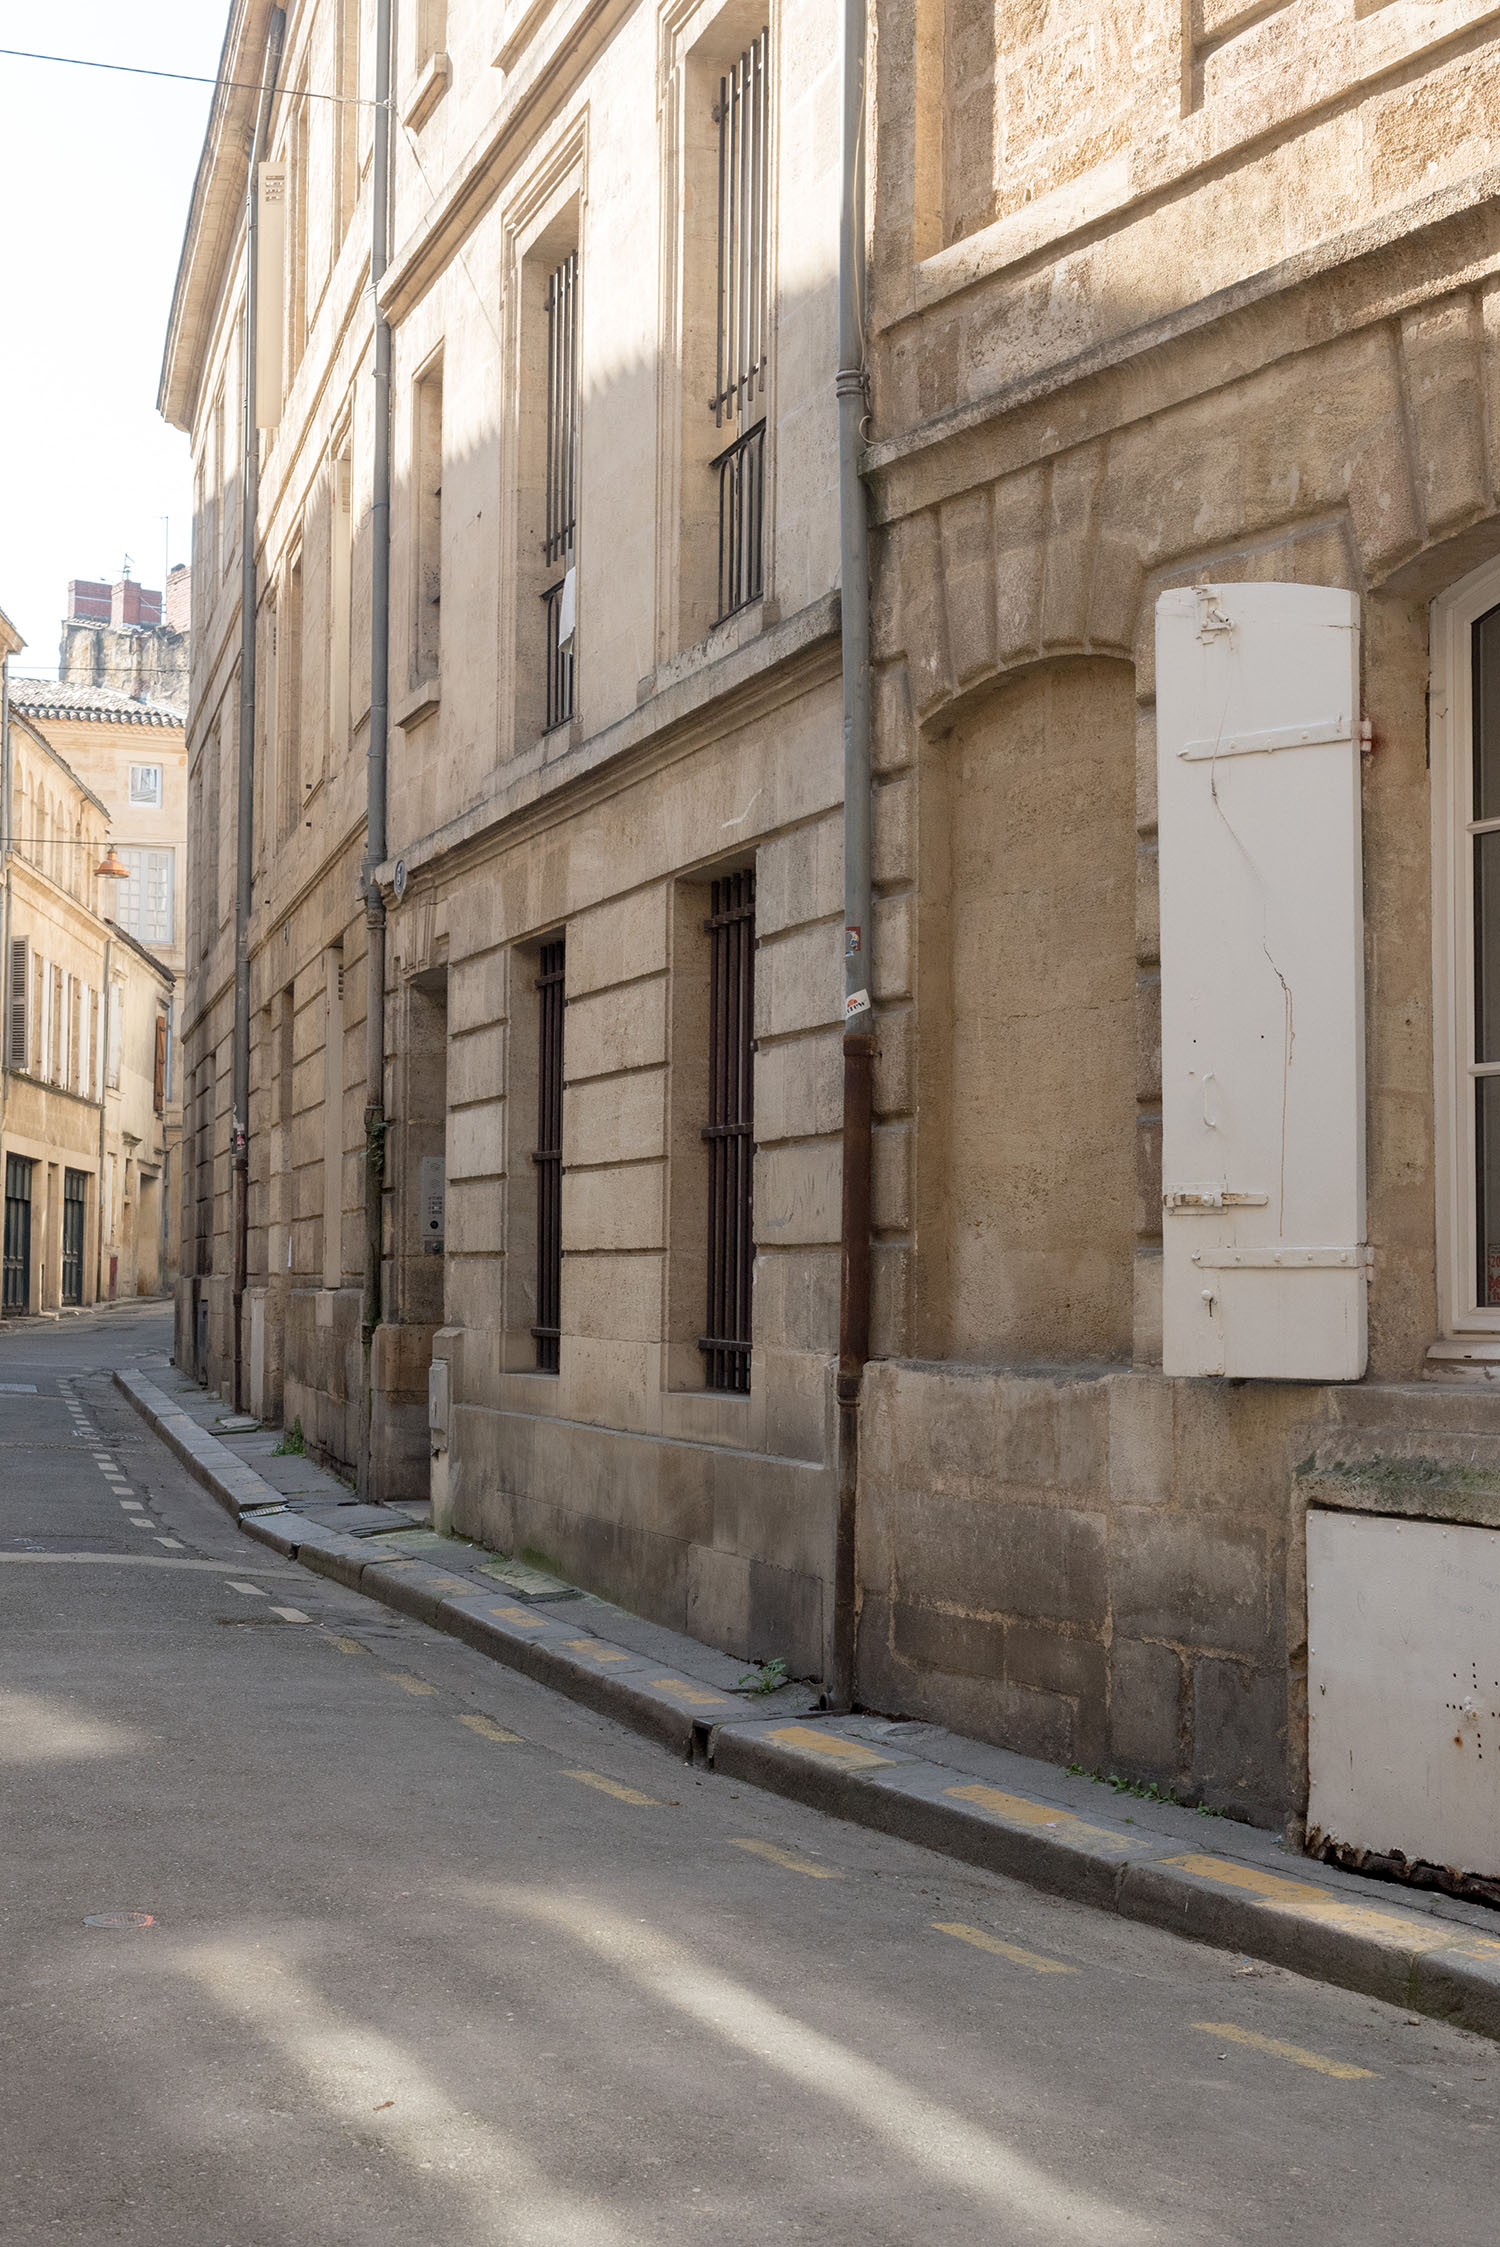 A tranquil medieval street in Bordeaux, France, as captured by top Canadian fashion blogger Cee Fardoe of Coco & Vera